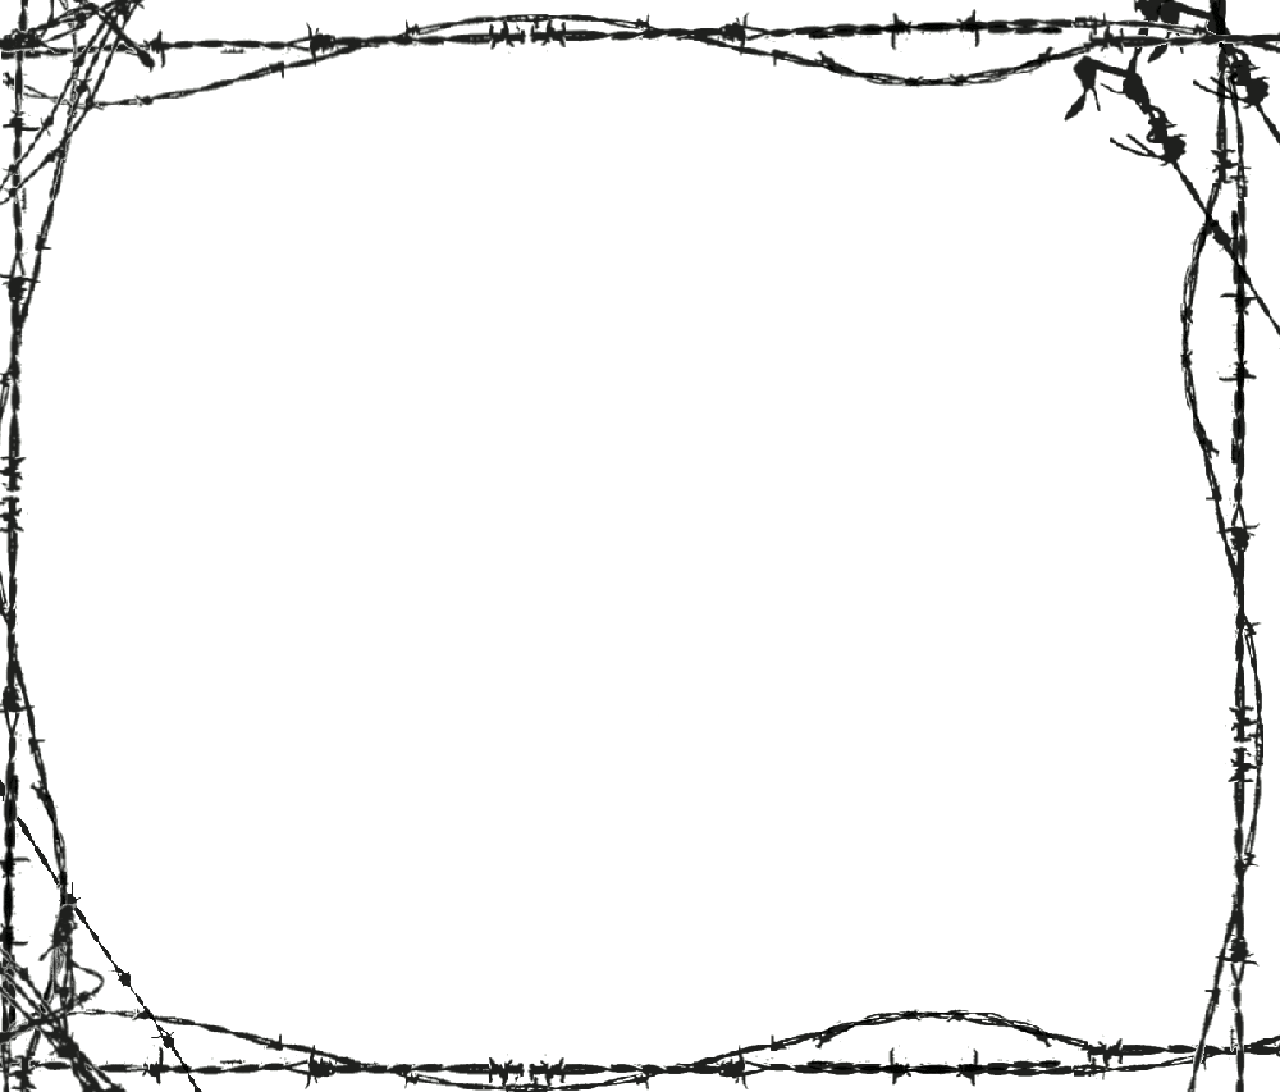 Barbed Wire Border by hellstained on Clipart library